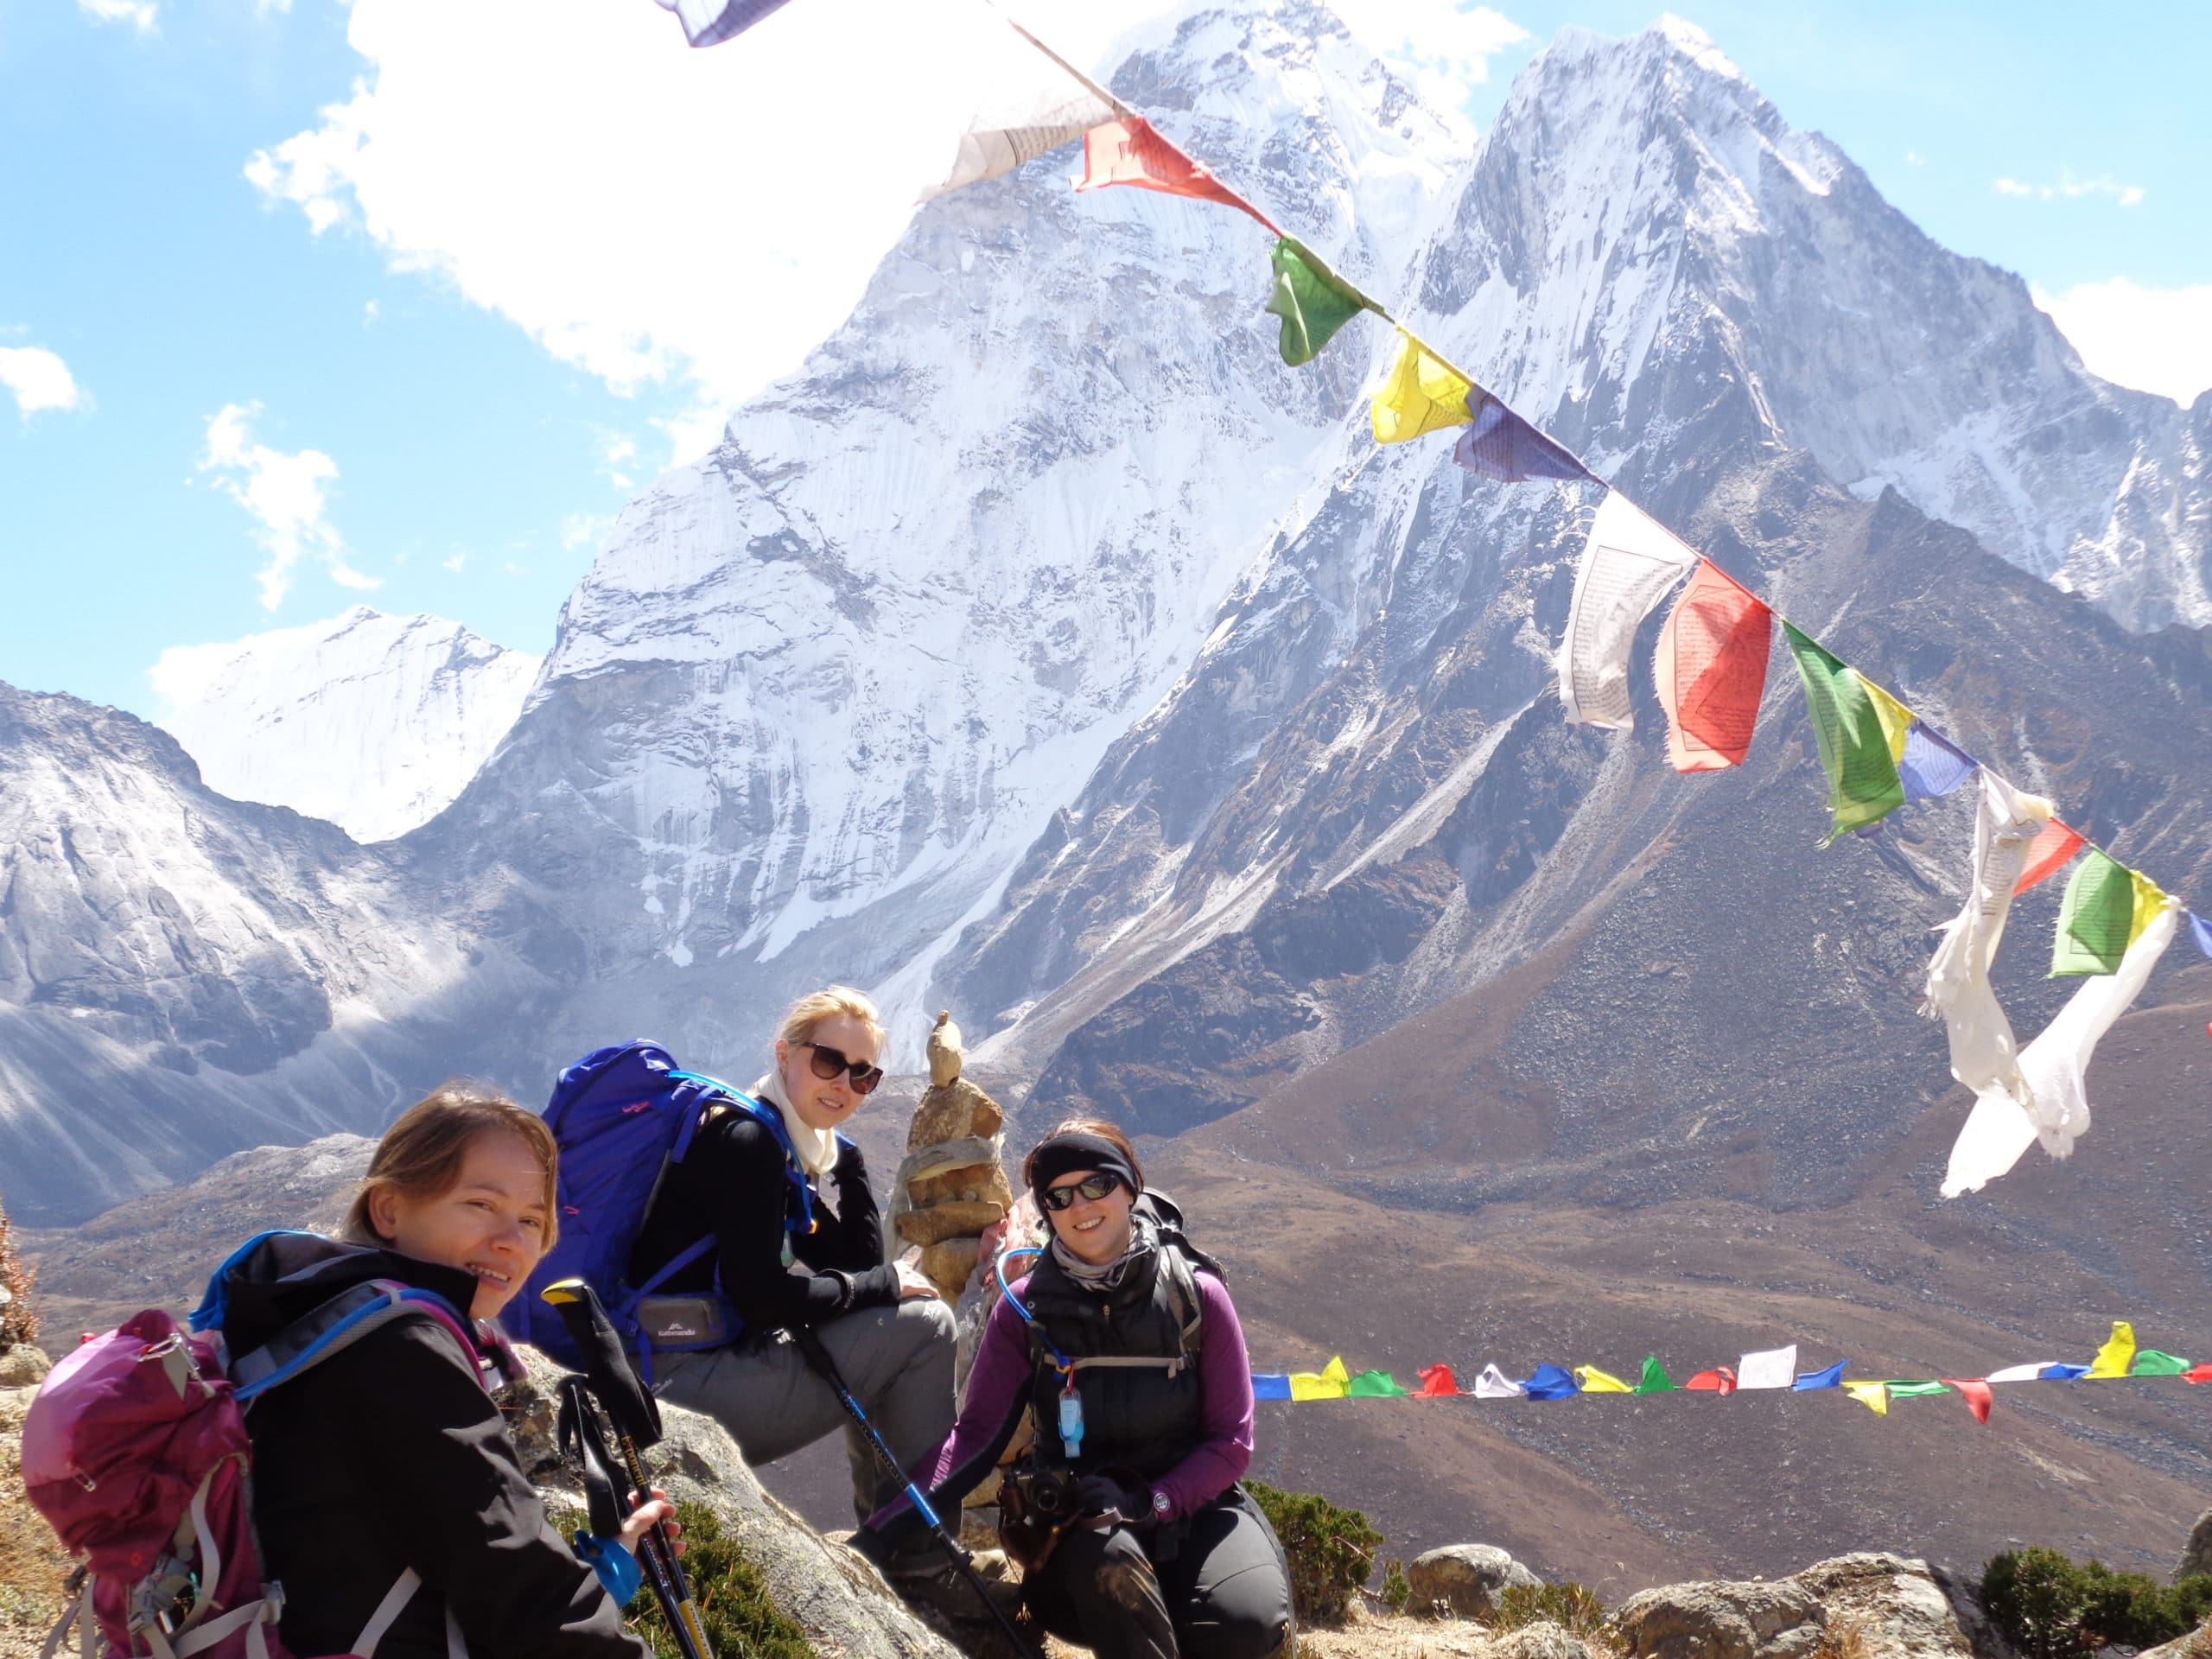 Ama Dablam from the trail to Mount Everest